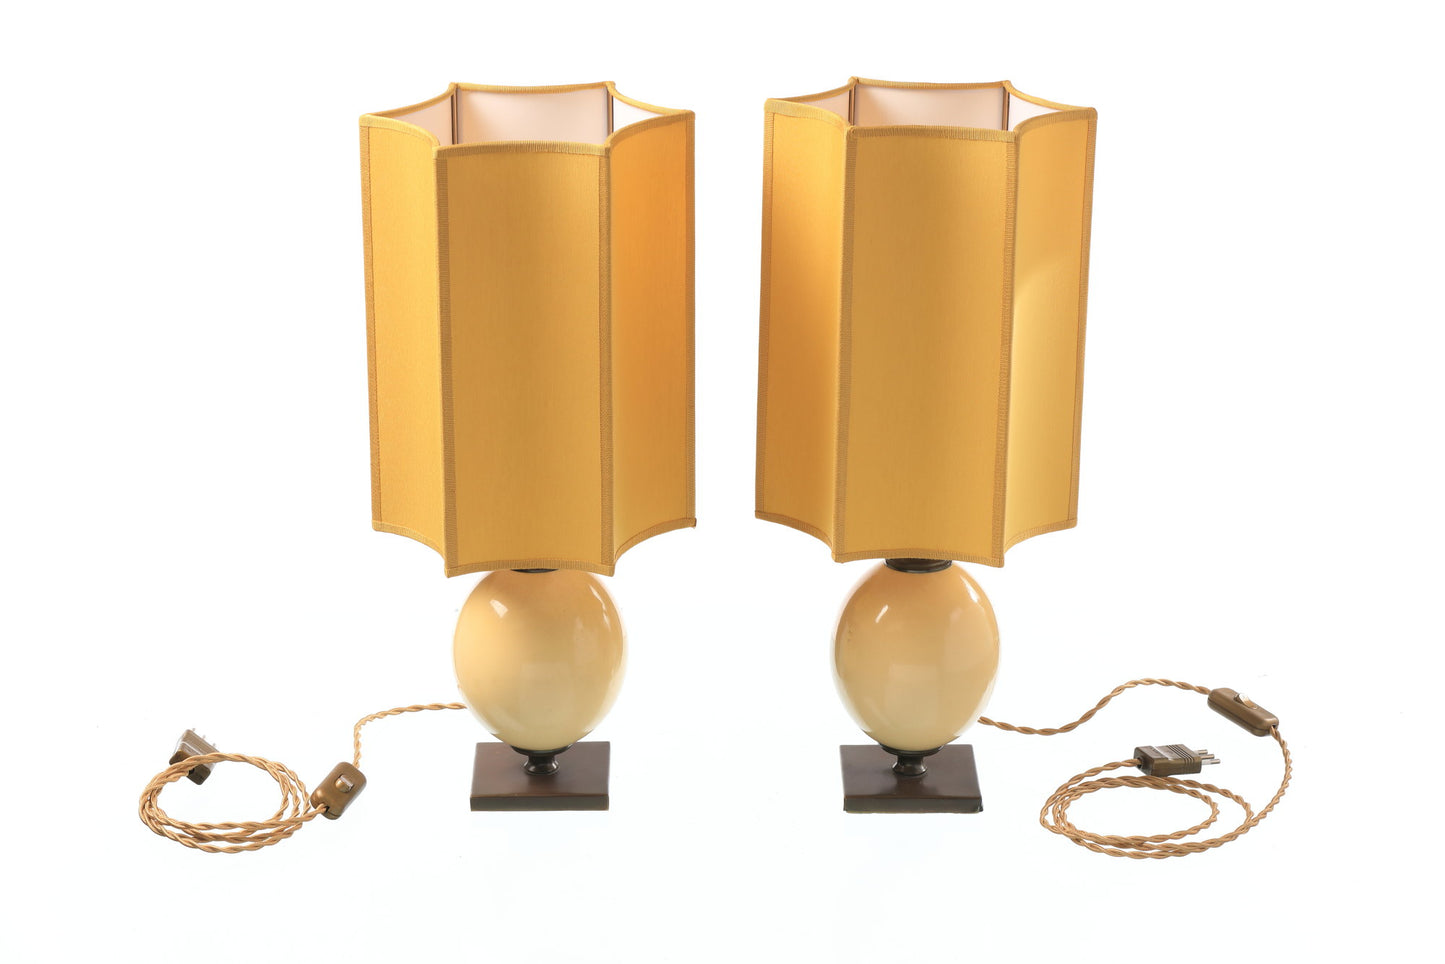 Pair of ostrich egg-shaped lamps